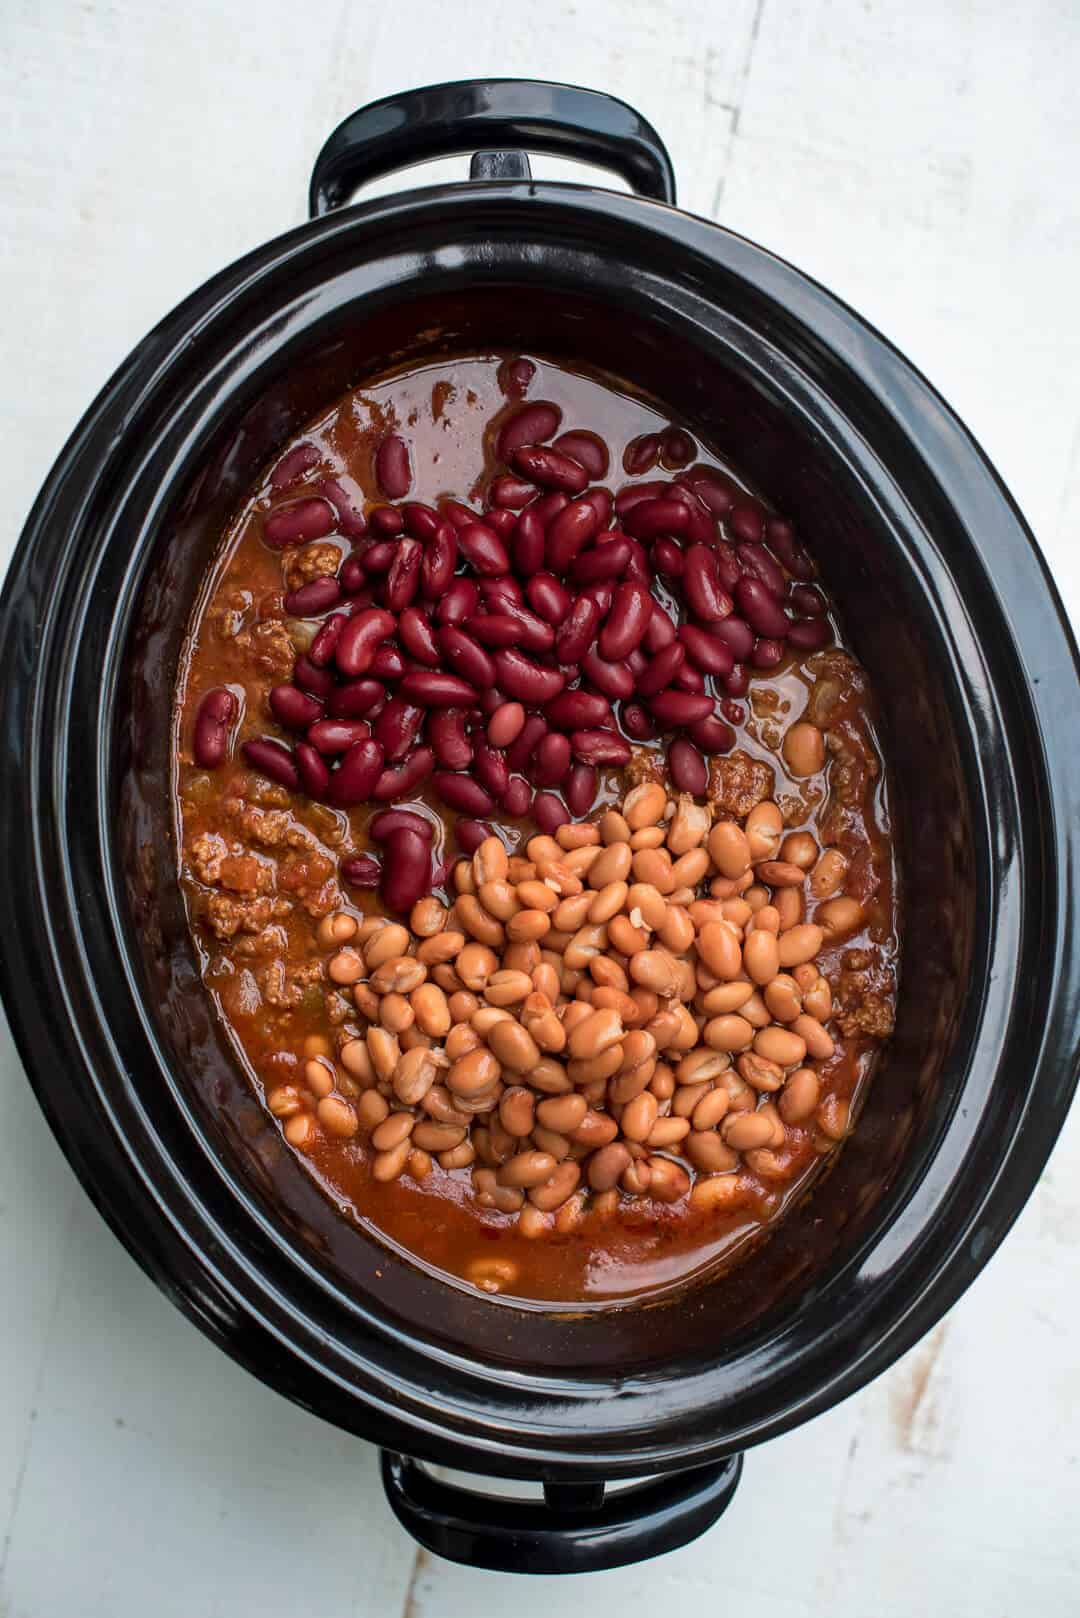 The beans are added to the slow cooker.